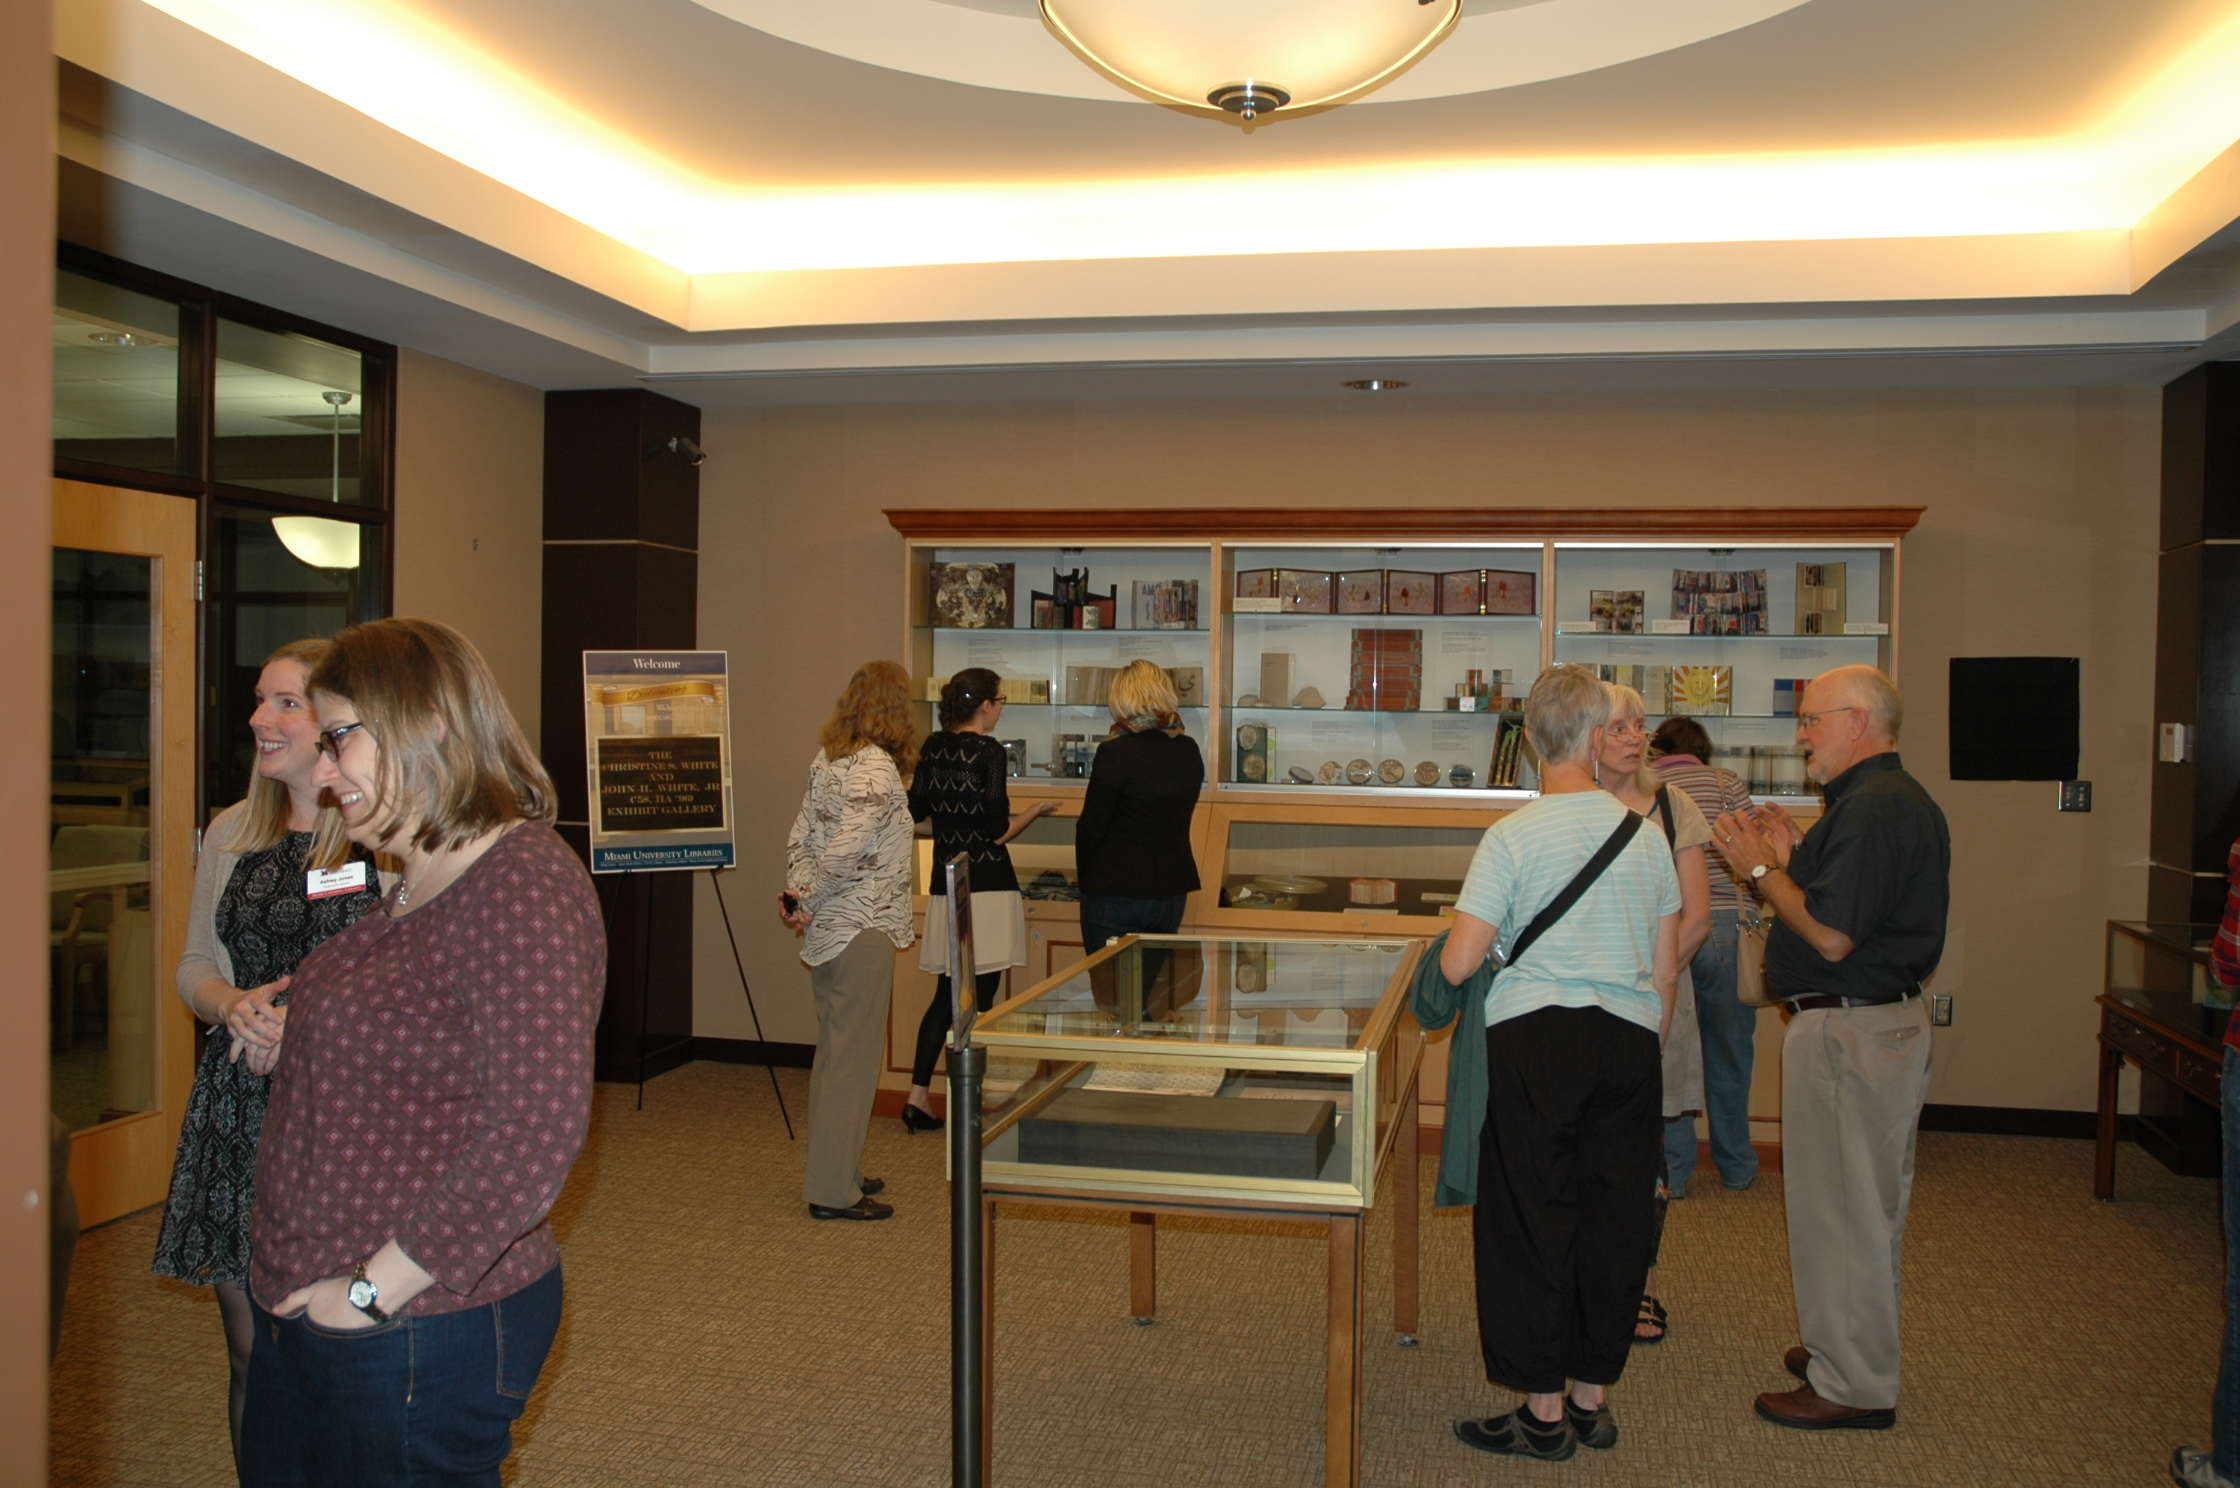 Guests browsing the exhibit